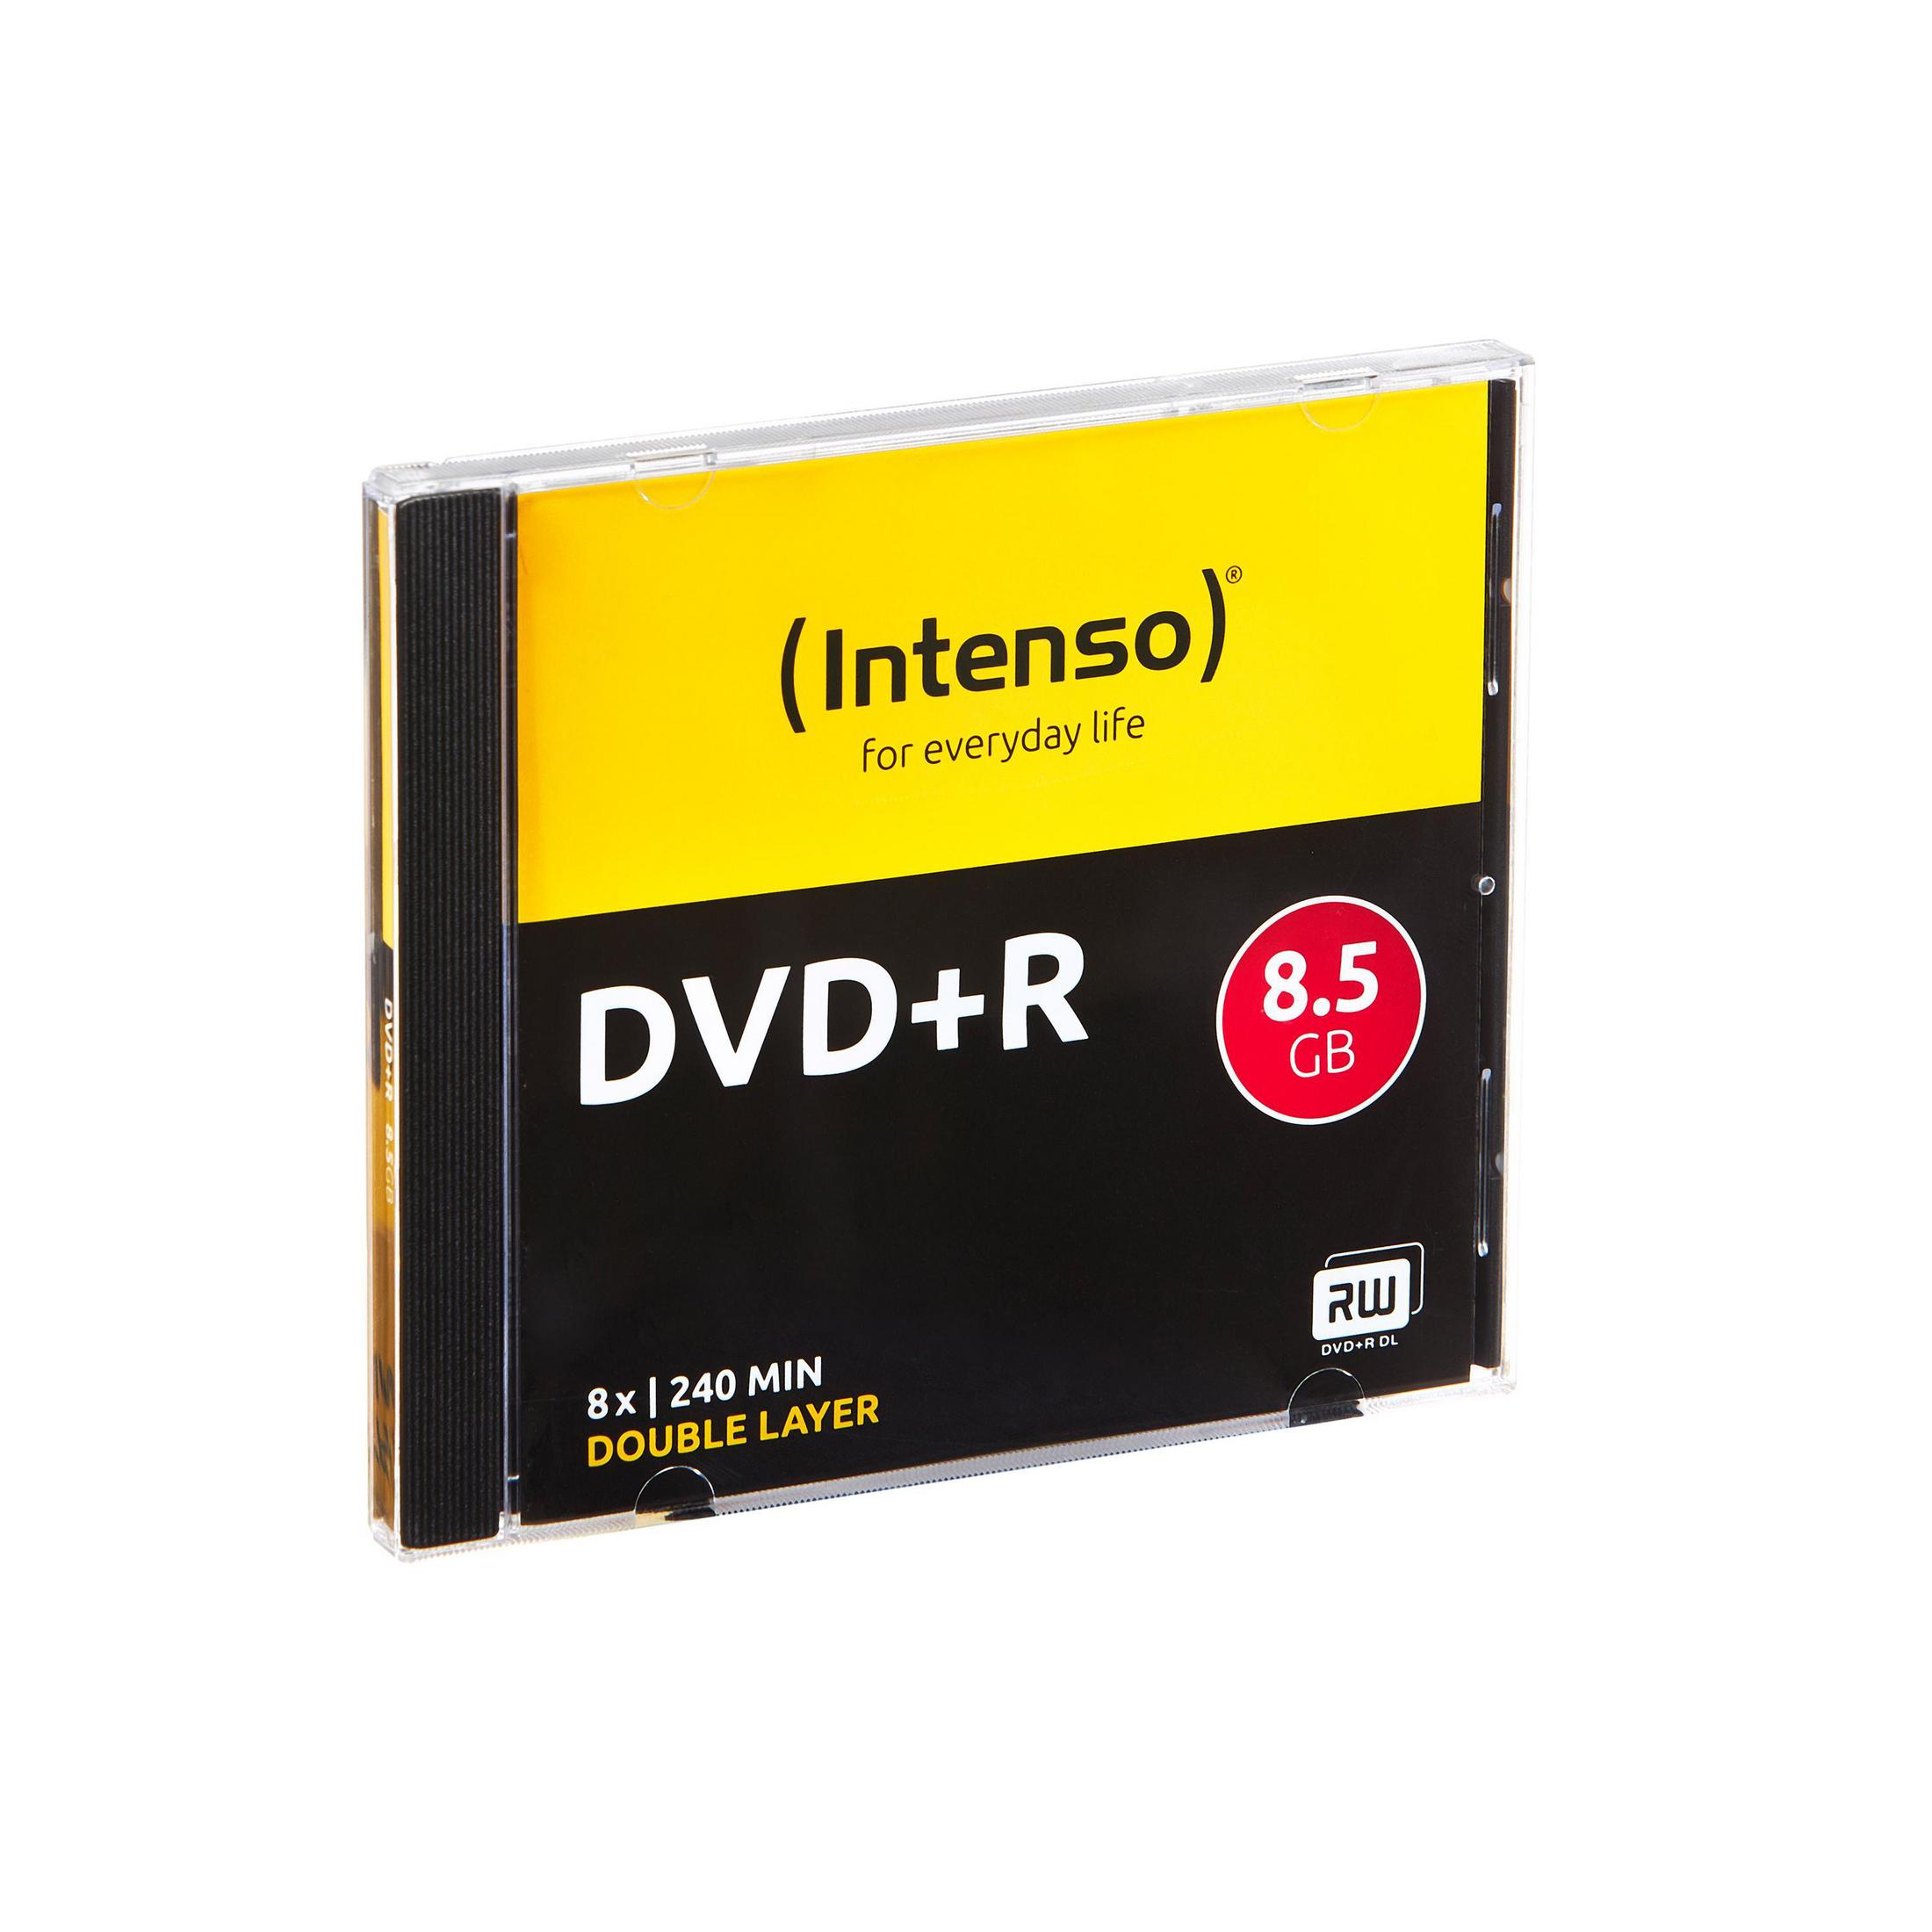 Layer DVD+R DVD+R Rohlinge 4311245 INTENSO DL 8X JC Double 5ER